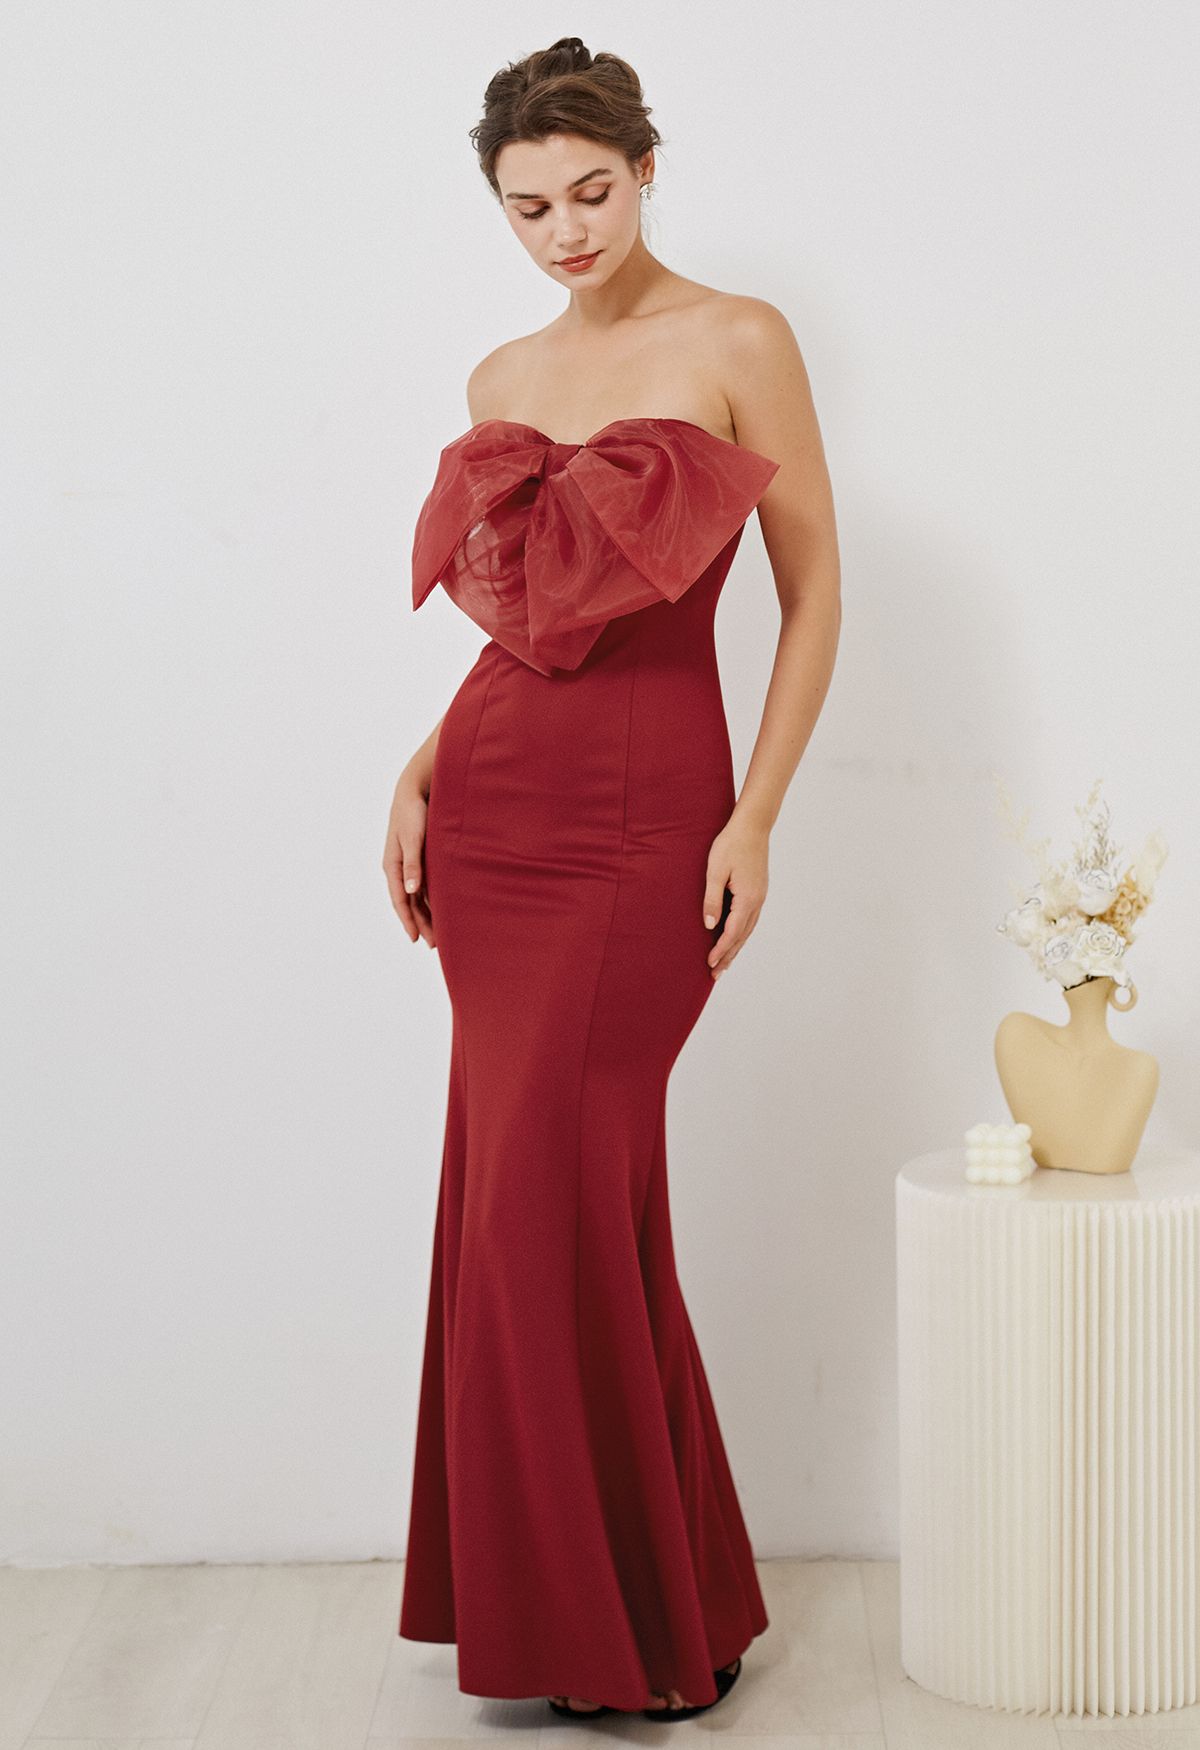 Bowknot Strapless Mermaid Gown in Burgundy